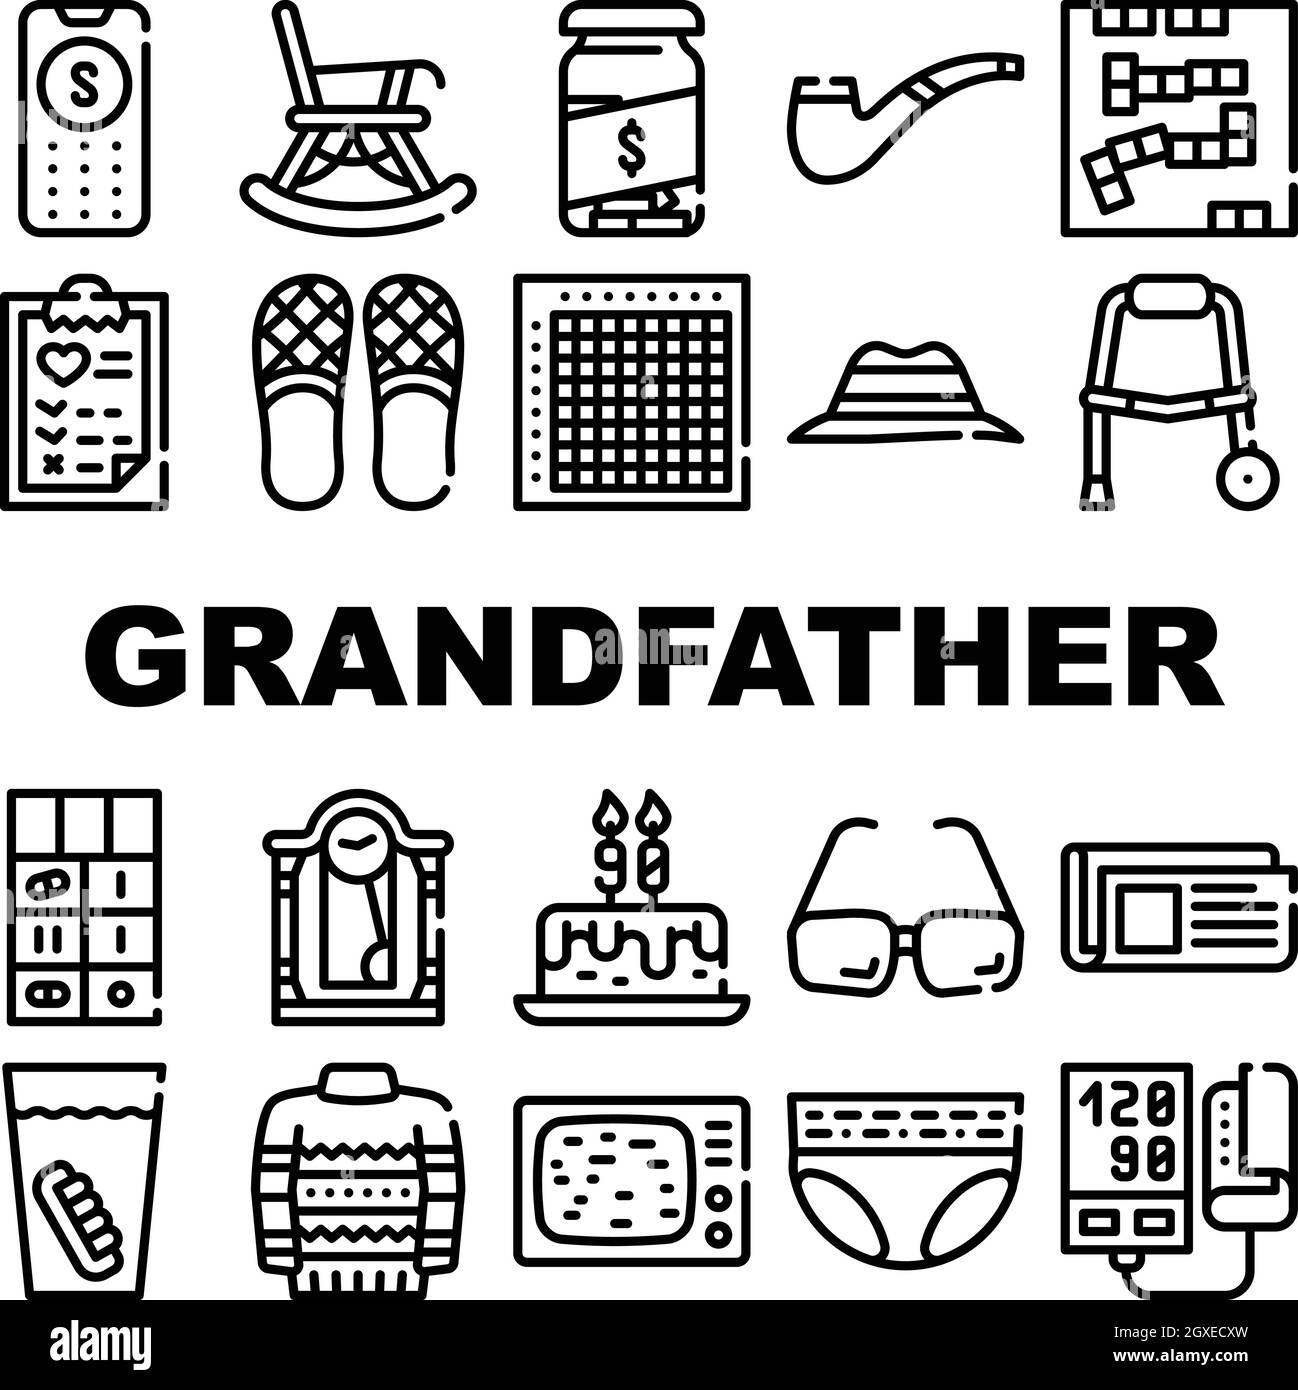 Grandfather Accessory Collection Icons Set Vector Illustrations Stock Vector